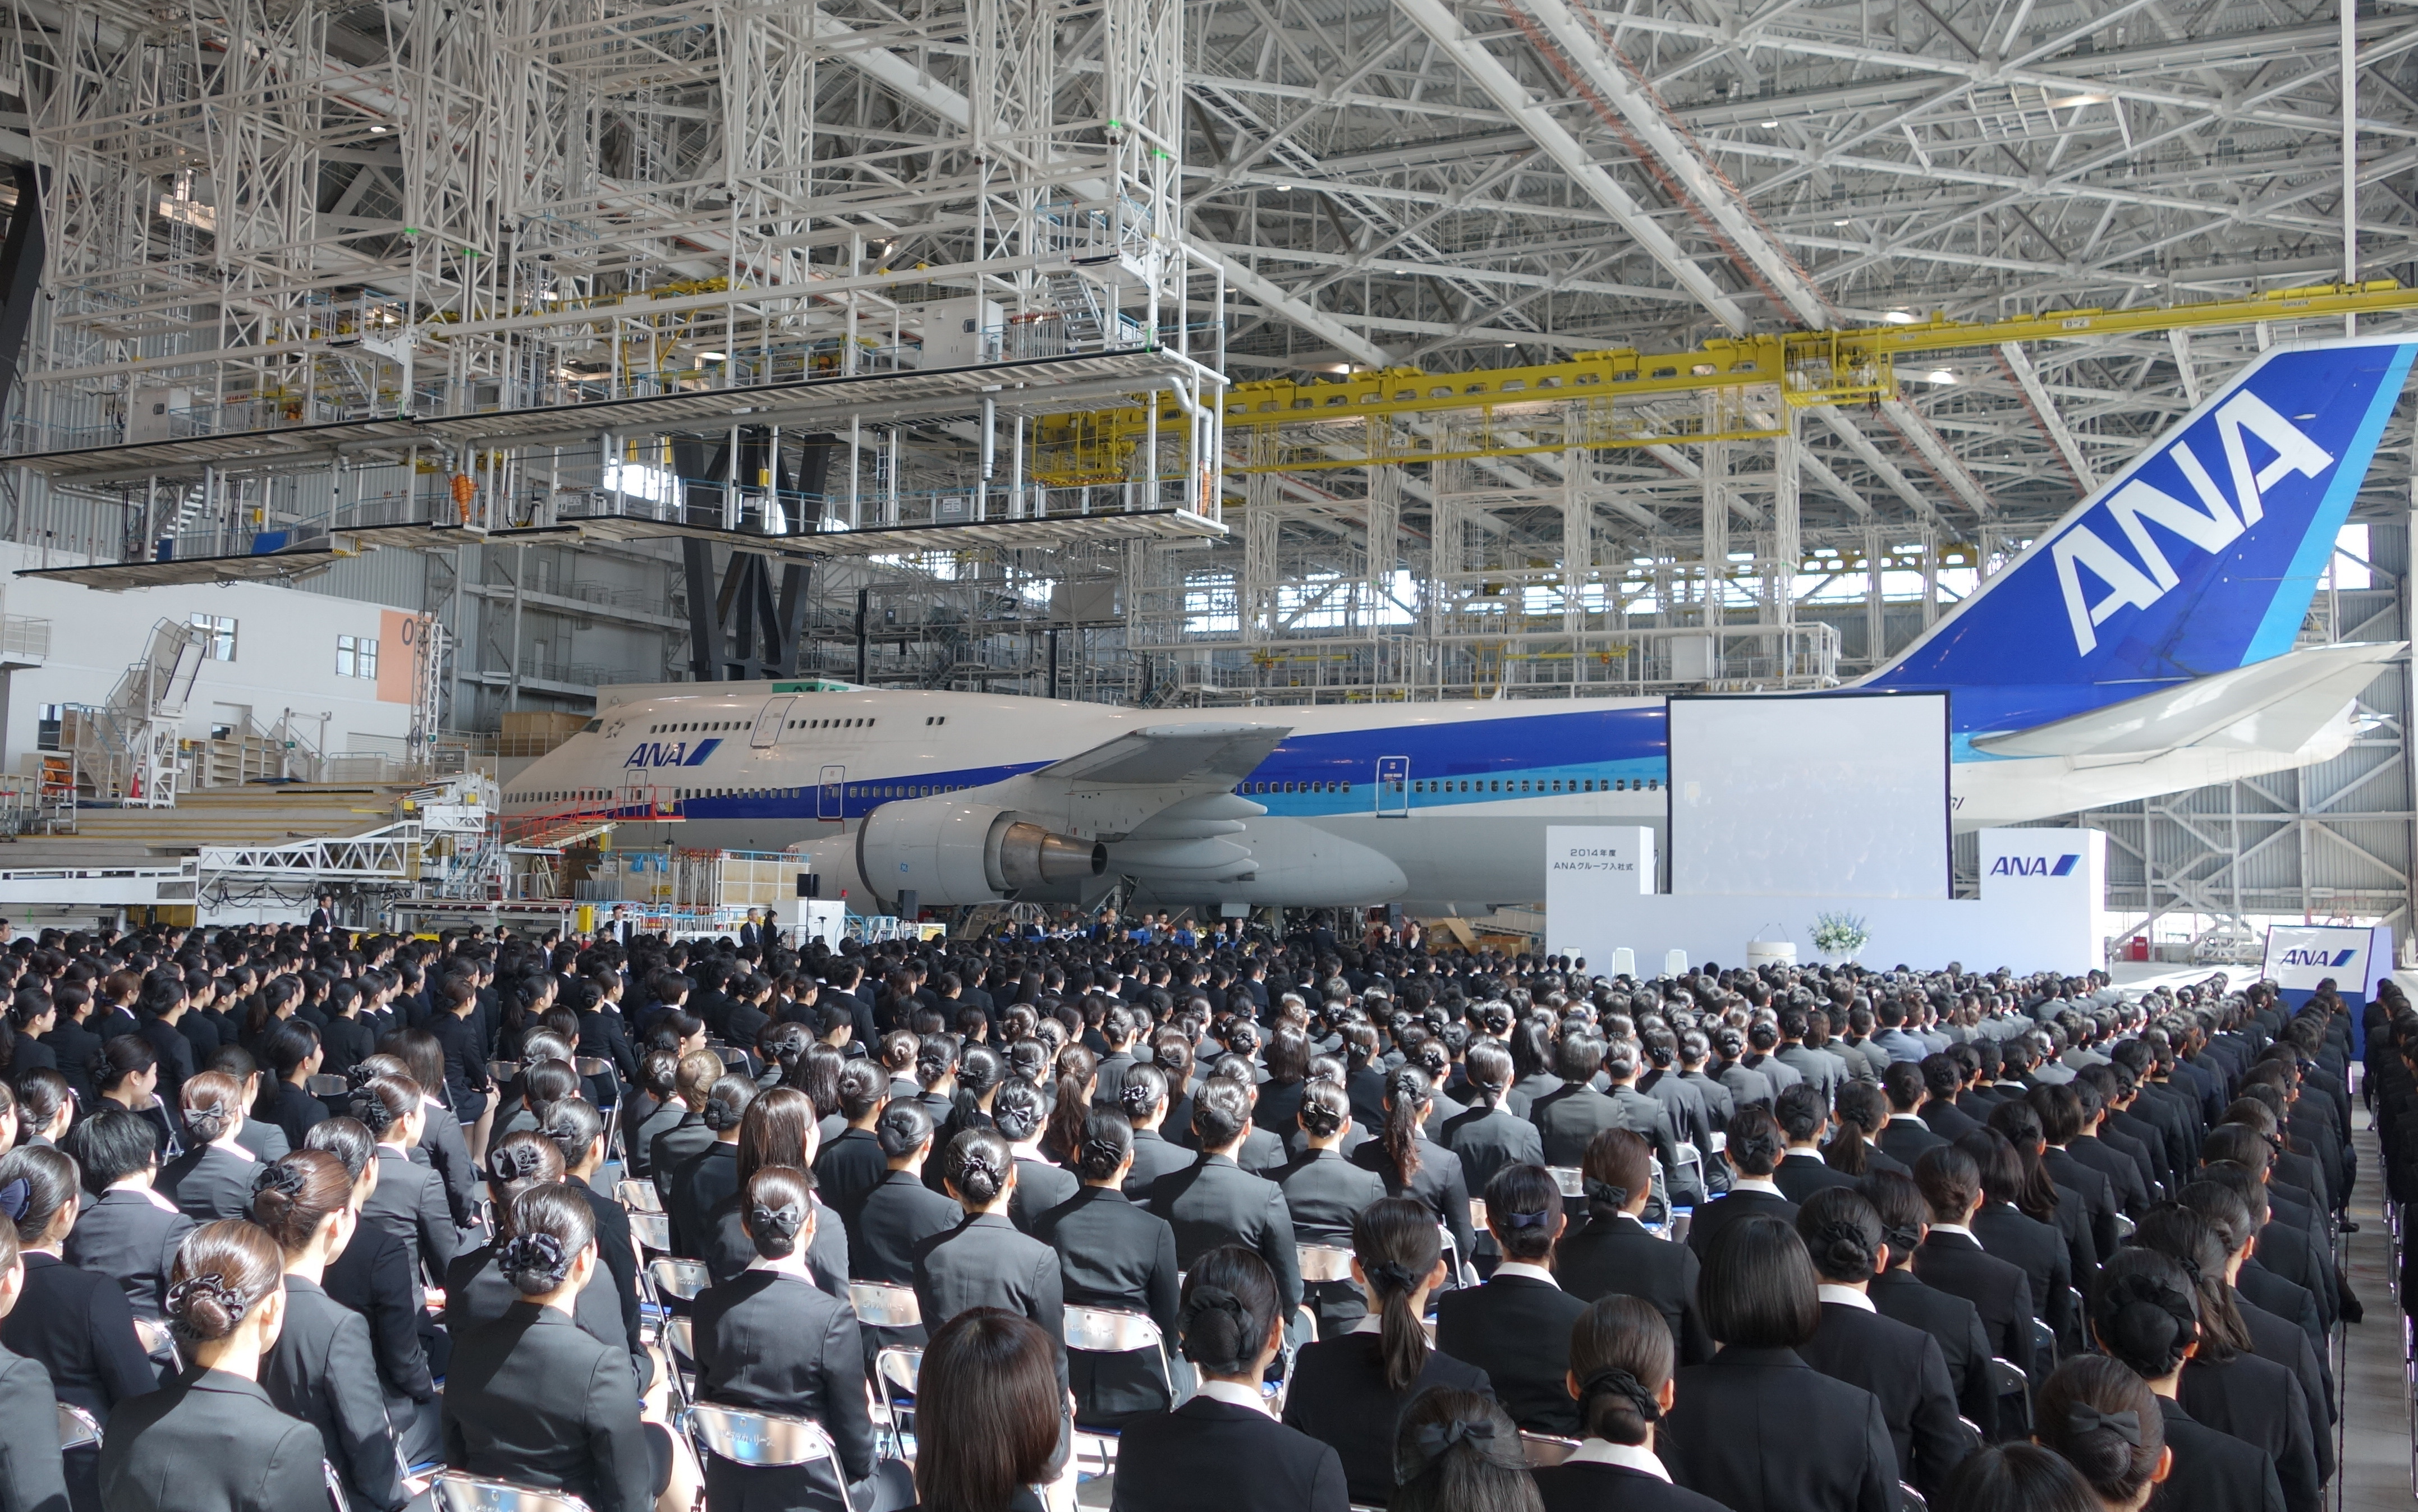 ANA - All Nippon Airways' New Employee Celebration, with ANA's last 747-400D